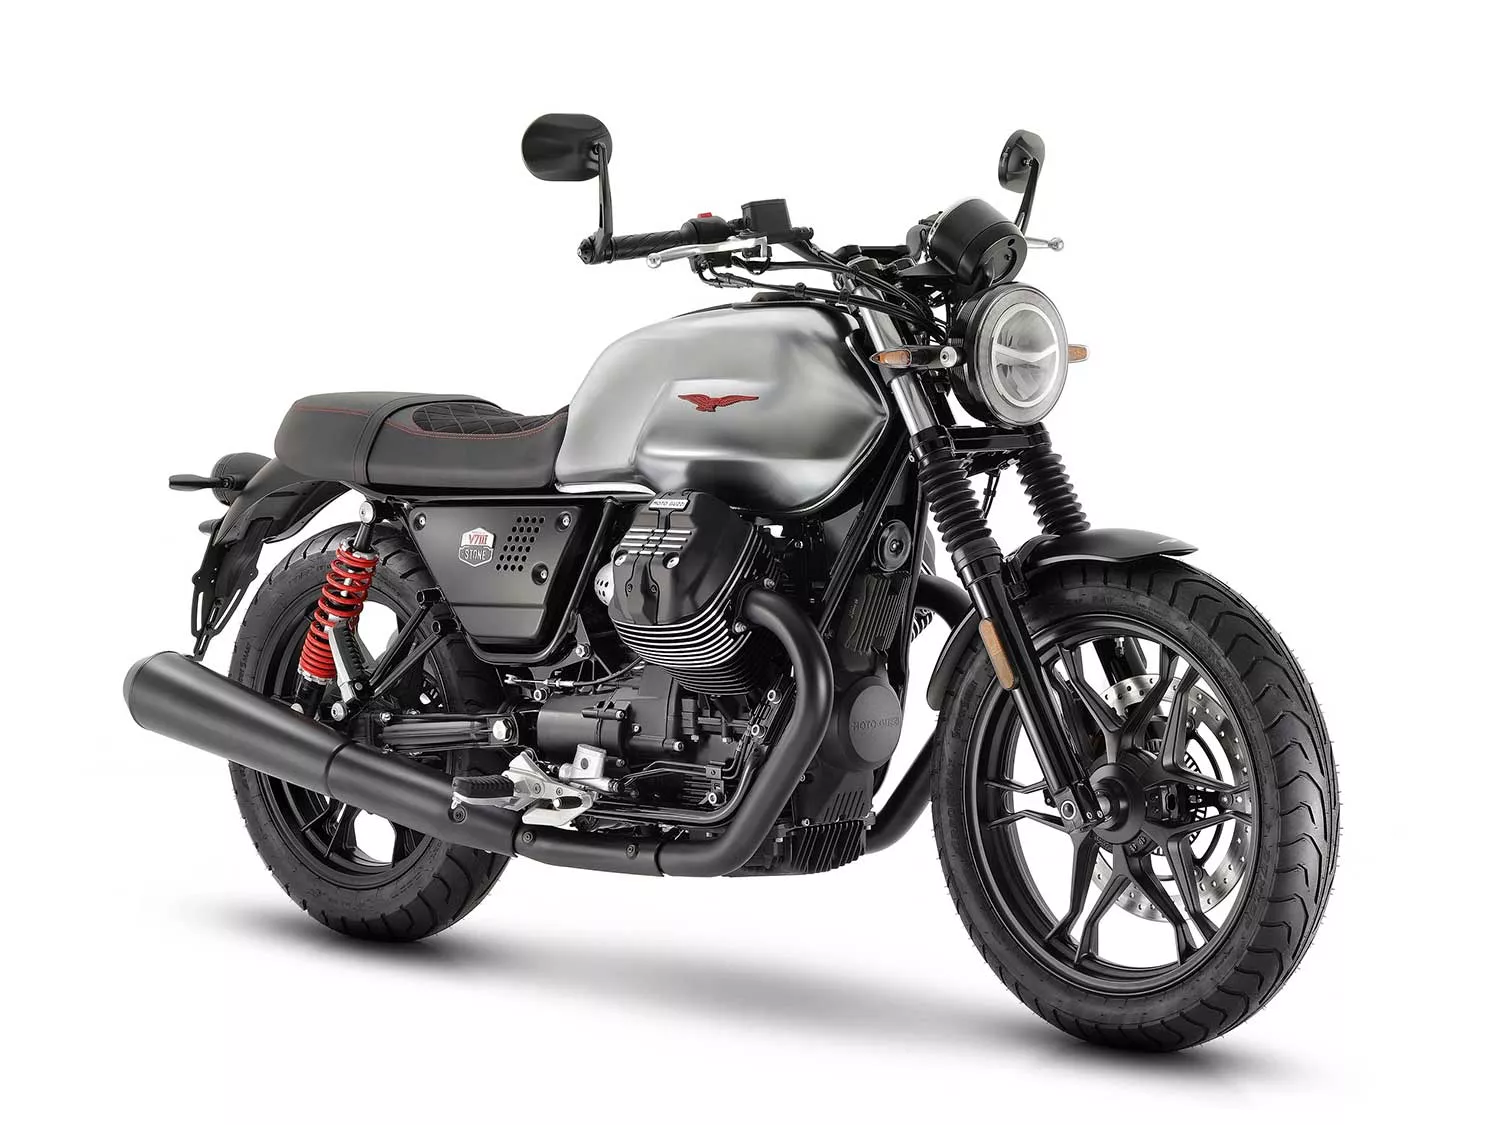 Moto Guzzi’s latest addition to the V7 series is the limited-edition 2020 V7 Stone S, announced at EICMA 2019.